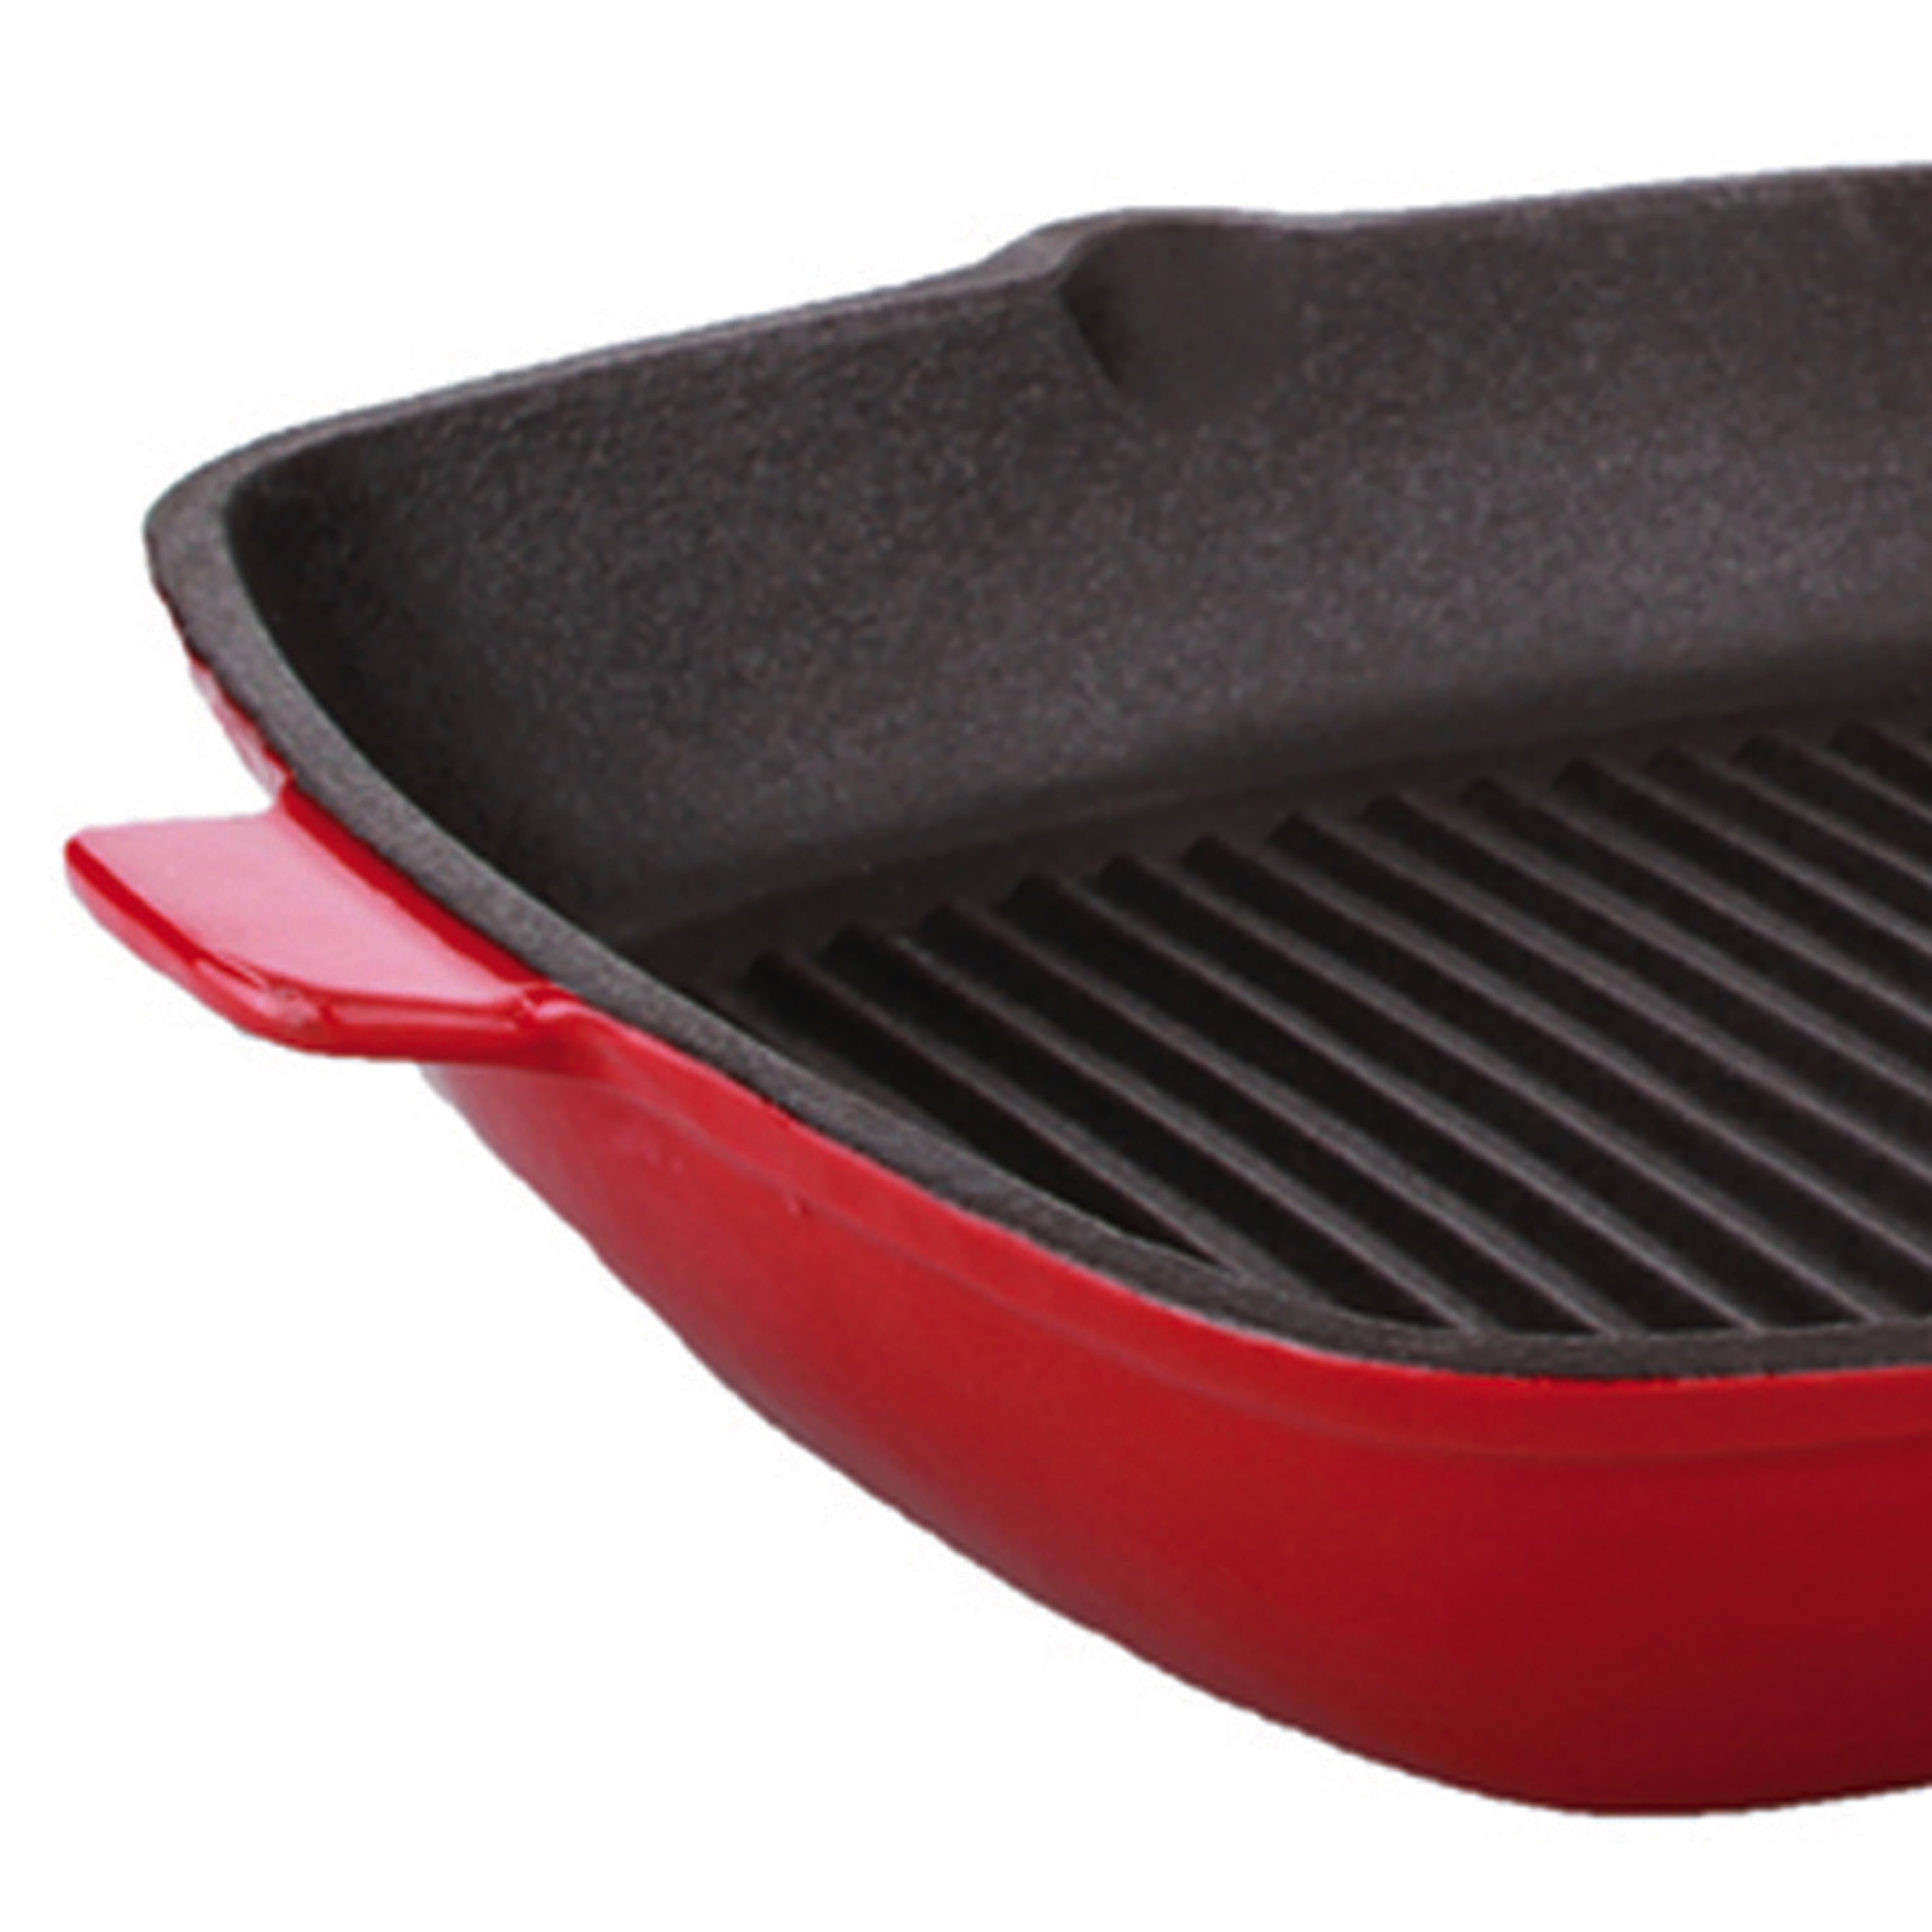 BergHOFF Neo 4Pc Enameled Cast Iron Cookware Set, Grill Pan 11 inches, Fry  Pan 10 inches, 3qt. Dutch Oven, Matching Lid, Fast, Evenly Heat, Oven Safe